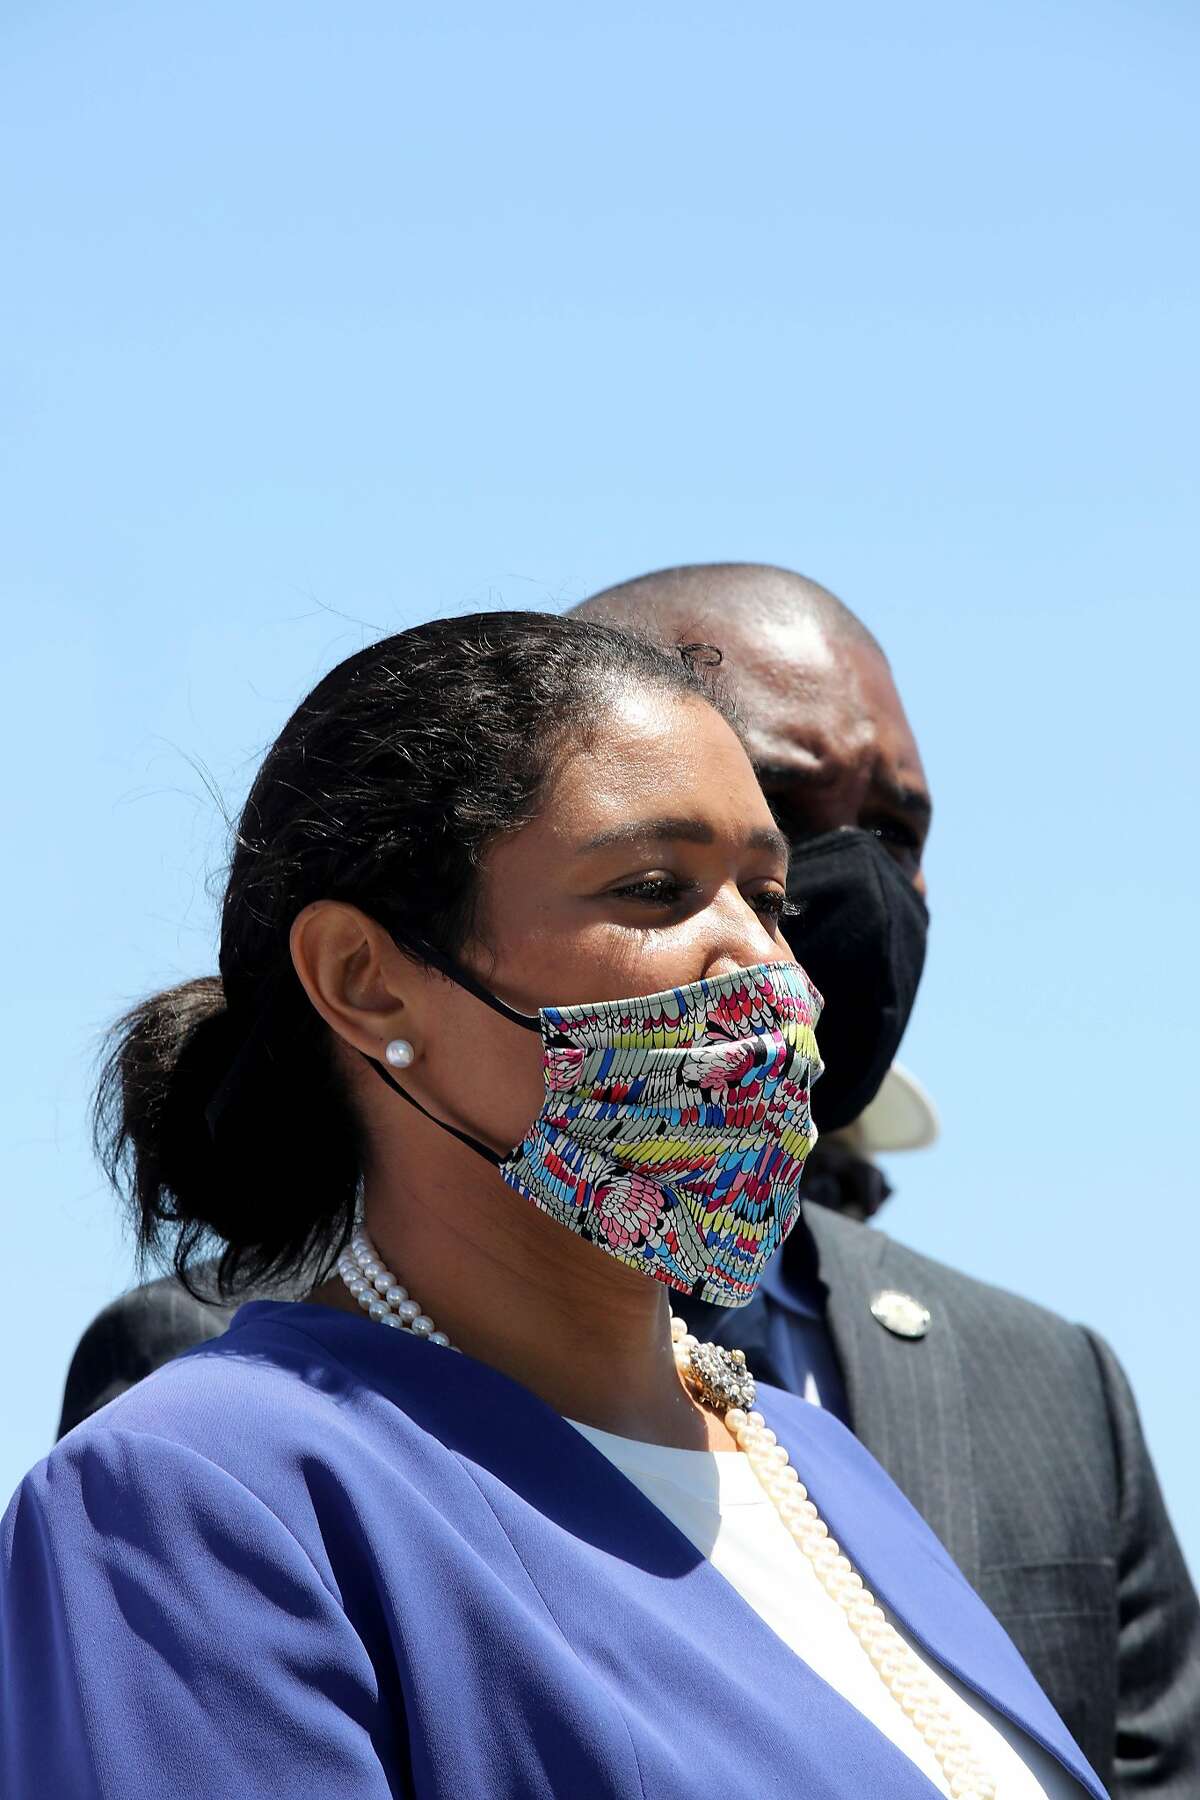 San Francisco Mayor London Breed attends a press conference at Agua Vista Park in San Francisco, Calif., on Tuesday, July 7, 2020.